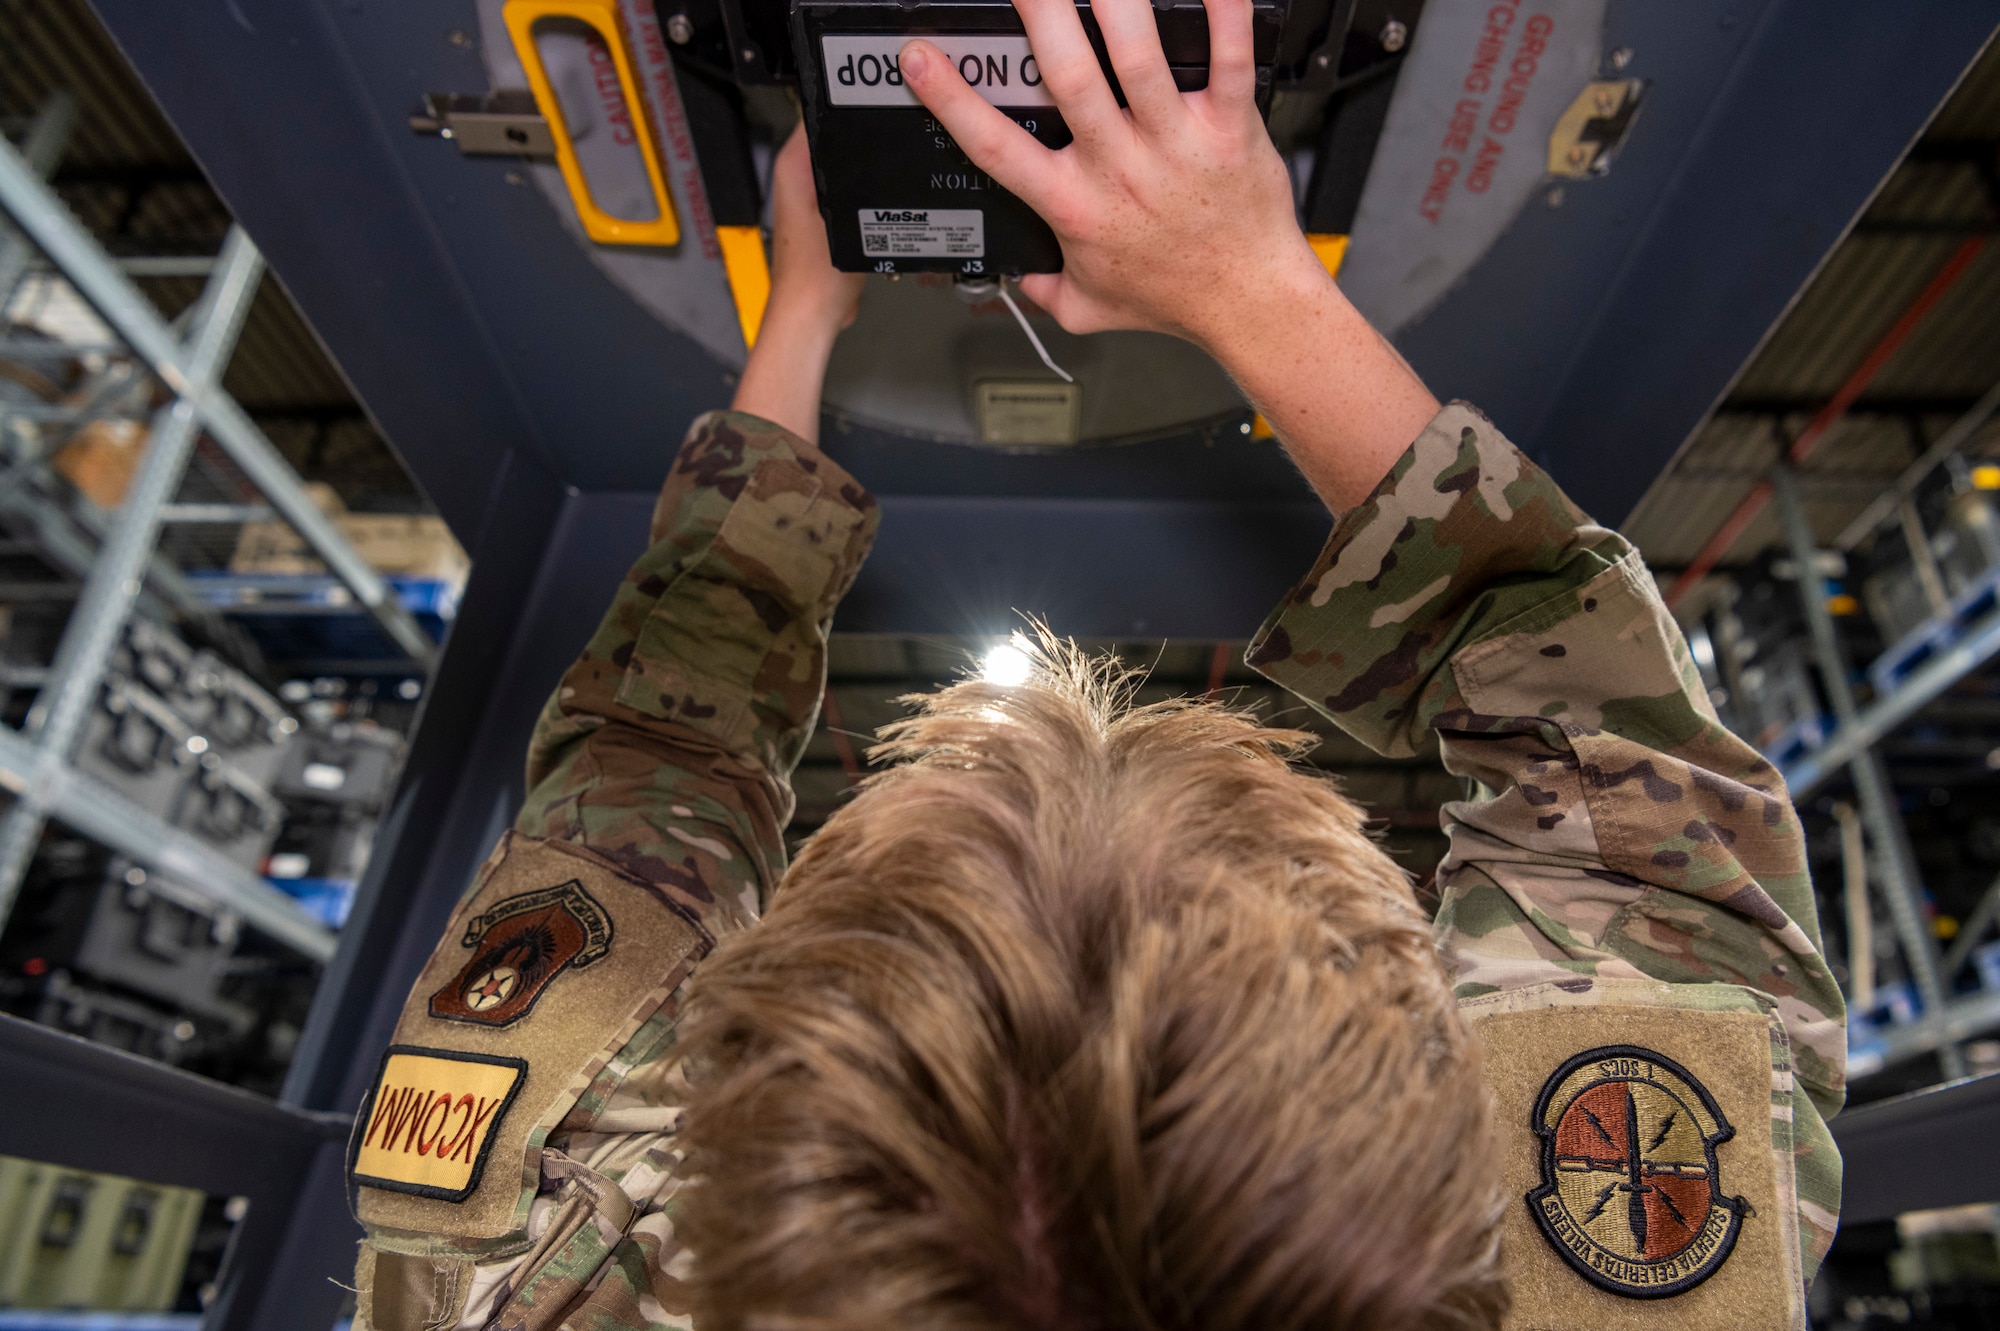 U.S. Air Force Senior Airman Lucas Gross, an Airborne Mission Network technician assigned to the 1st Special Operations Communications Squadron, attaches an Inertial Reference Unit (IRU) to the bottom side of an antenna that is then later attached to an In-Vehicle-Equipment or IVE-Kit, Aug. 4, 2022 at Hurlburt Field, Florida. The IRU and IVE-Kit equipment allow training to be conducted in a classroom setting without the need to step out to work on an aircraft.